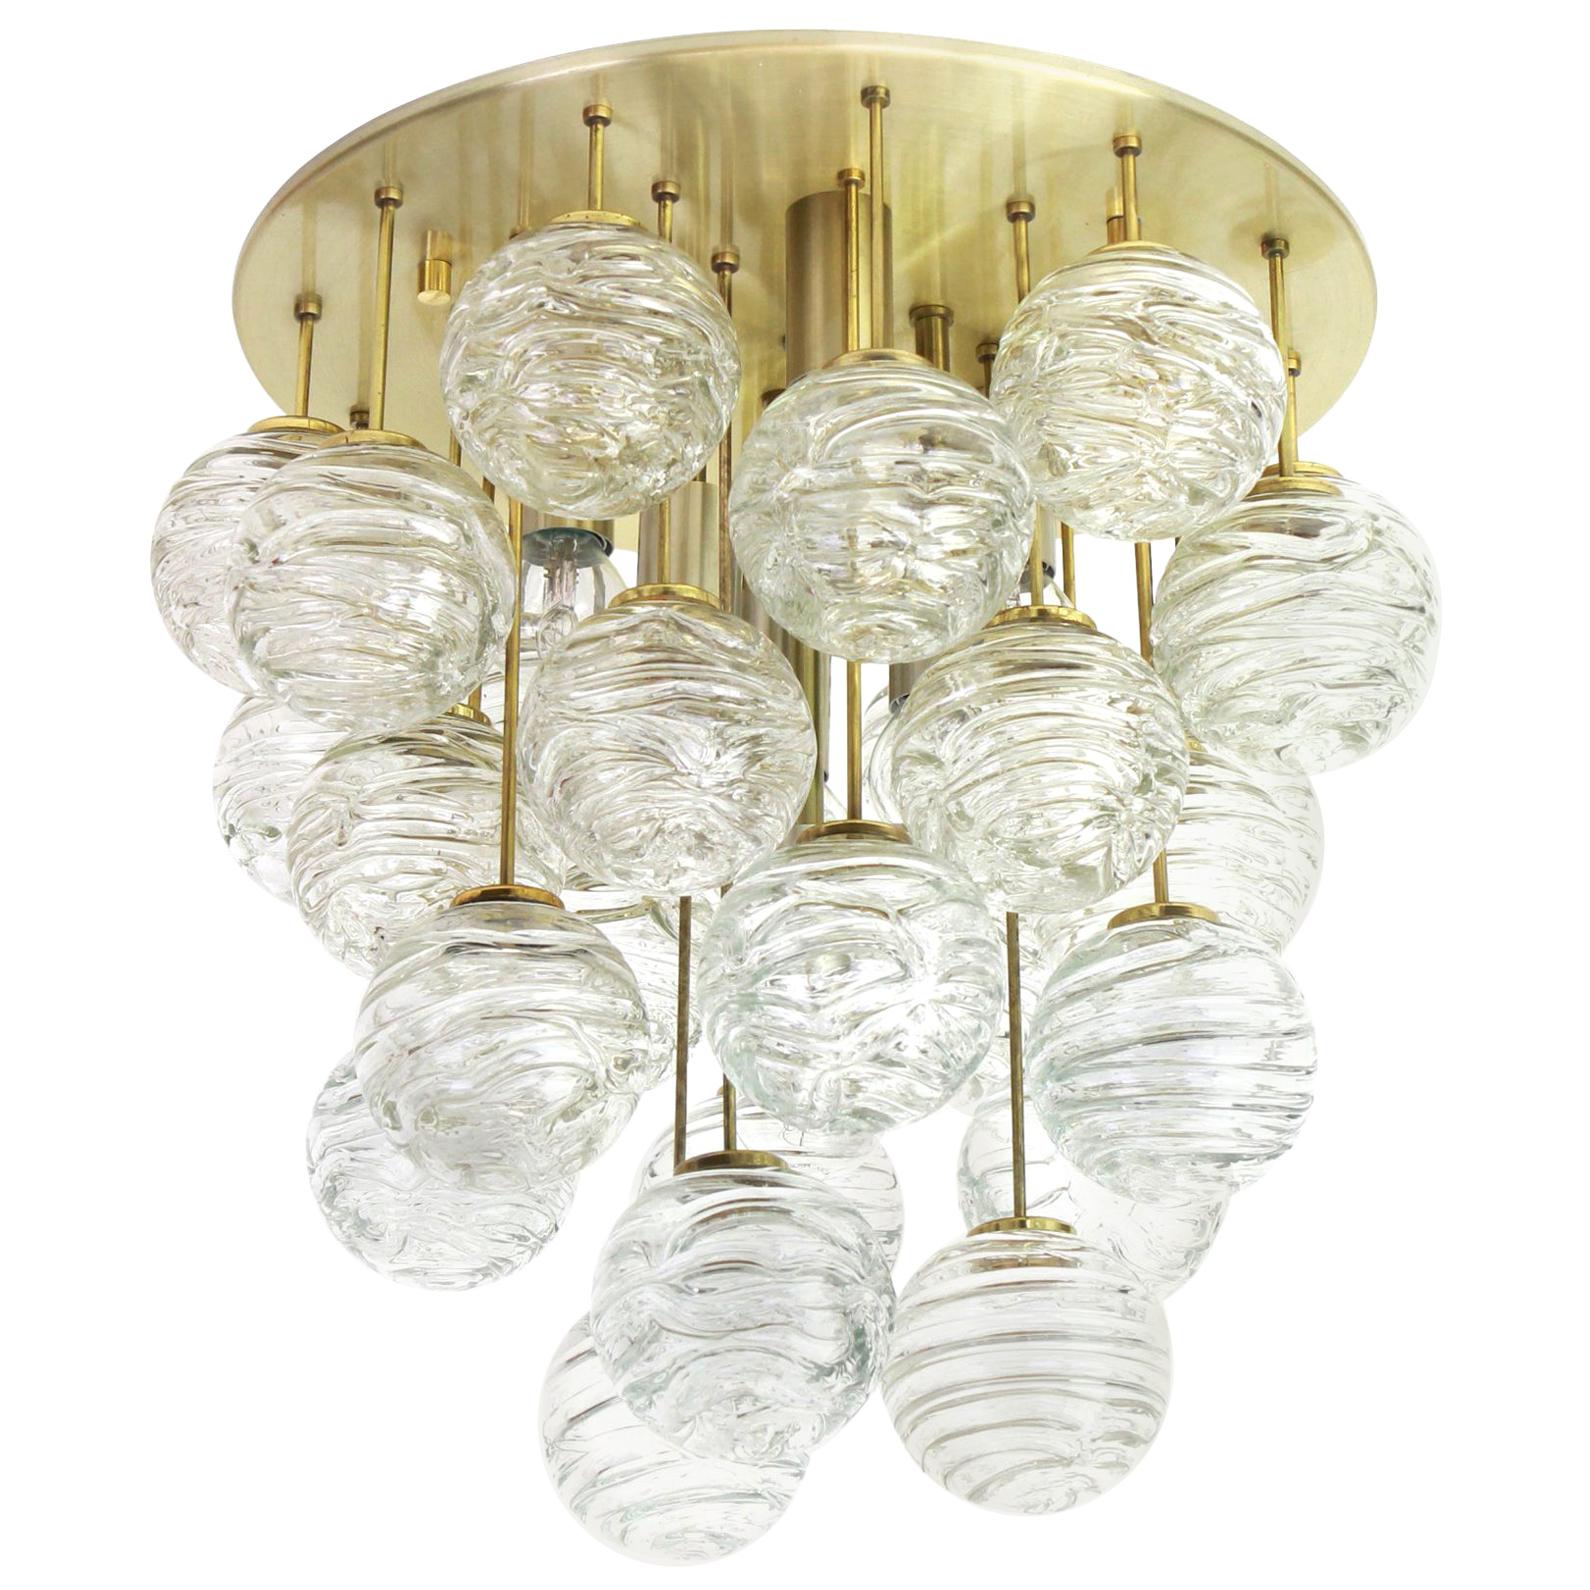 A Petite midcentury flushmount made by Doria Leuchtern, manufactured in Germany, circa 1970-1979.

The flushmount is composed of many Glass swirl textured ice glass elements (snowballs) attached to a brass frame.
Made by Doria in Germany,